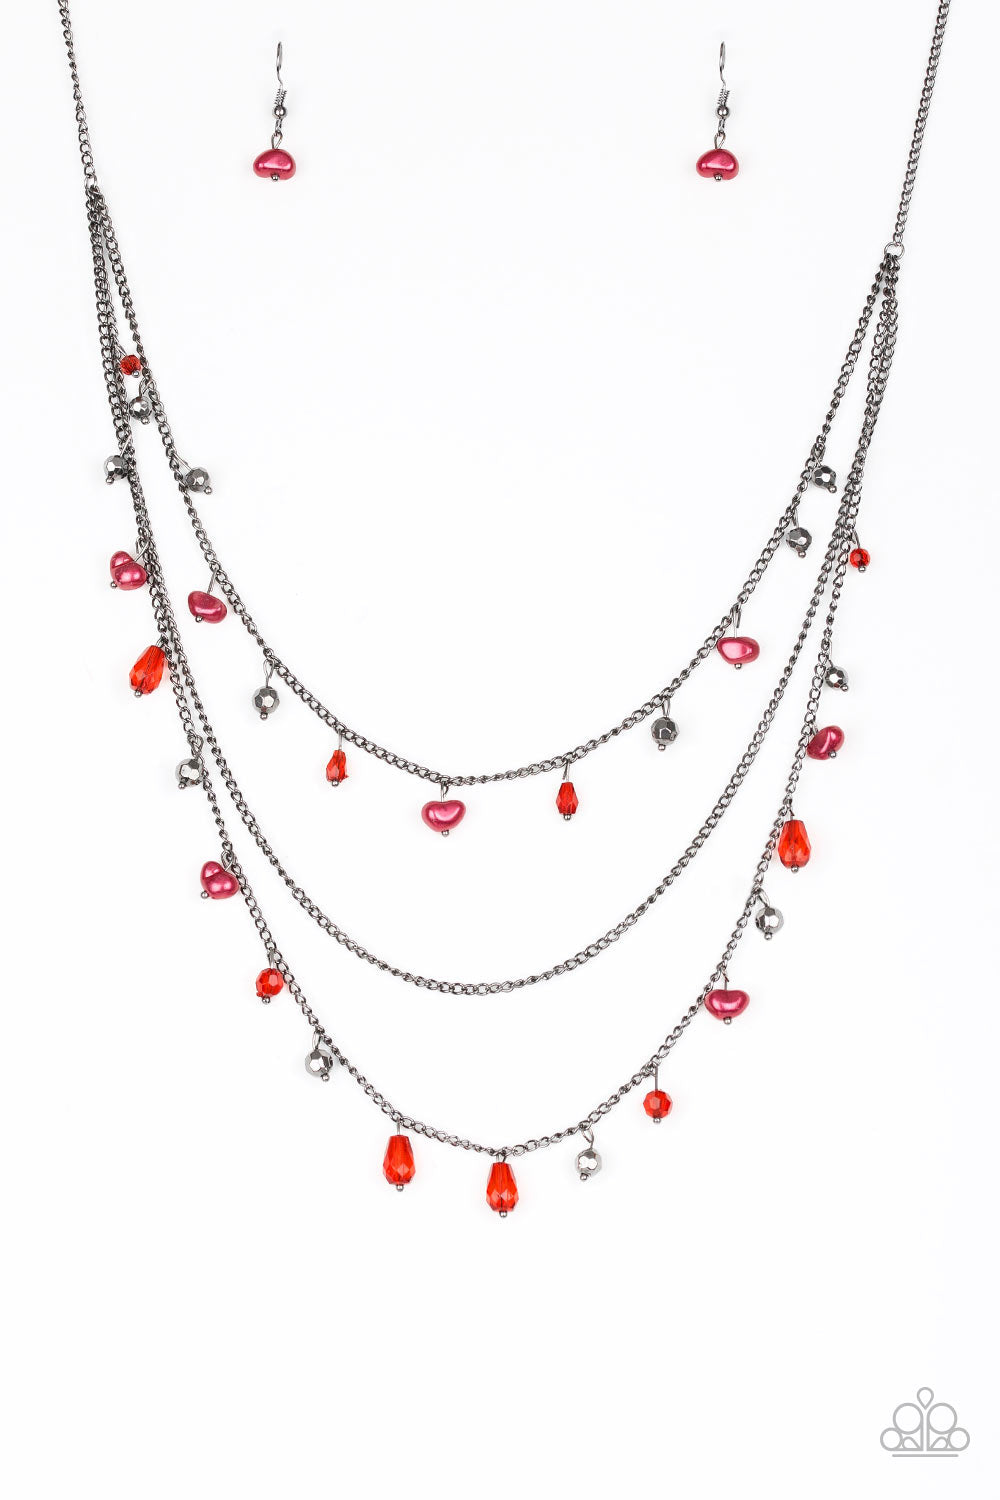 Paparazzi Necklace ~ Pebble Beach Beauty - Red